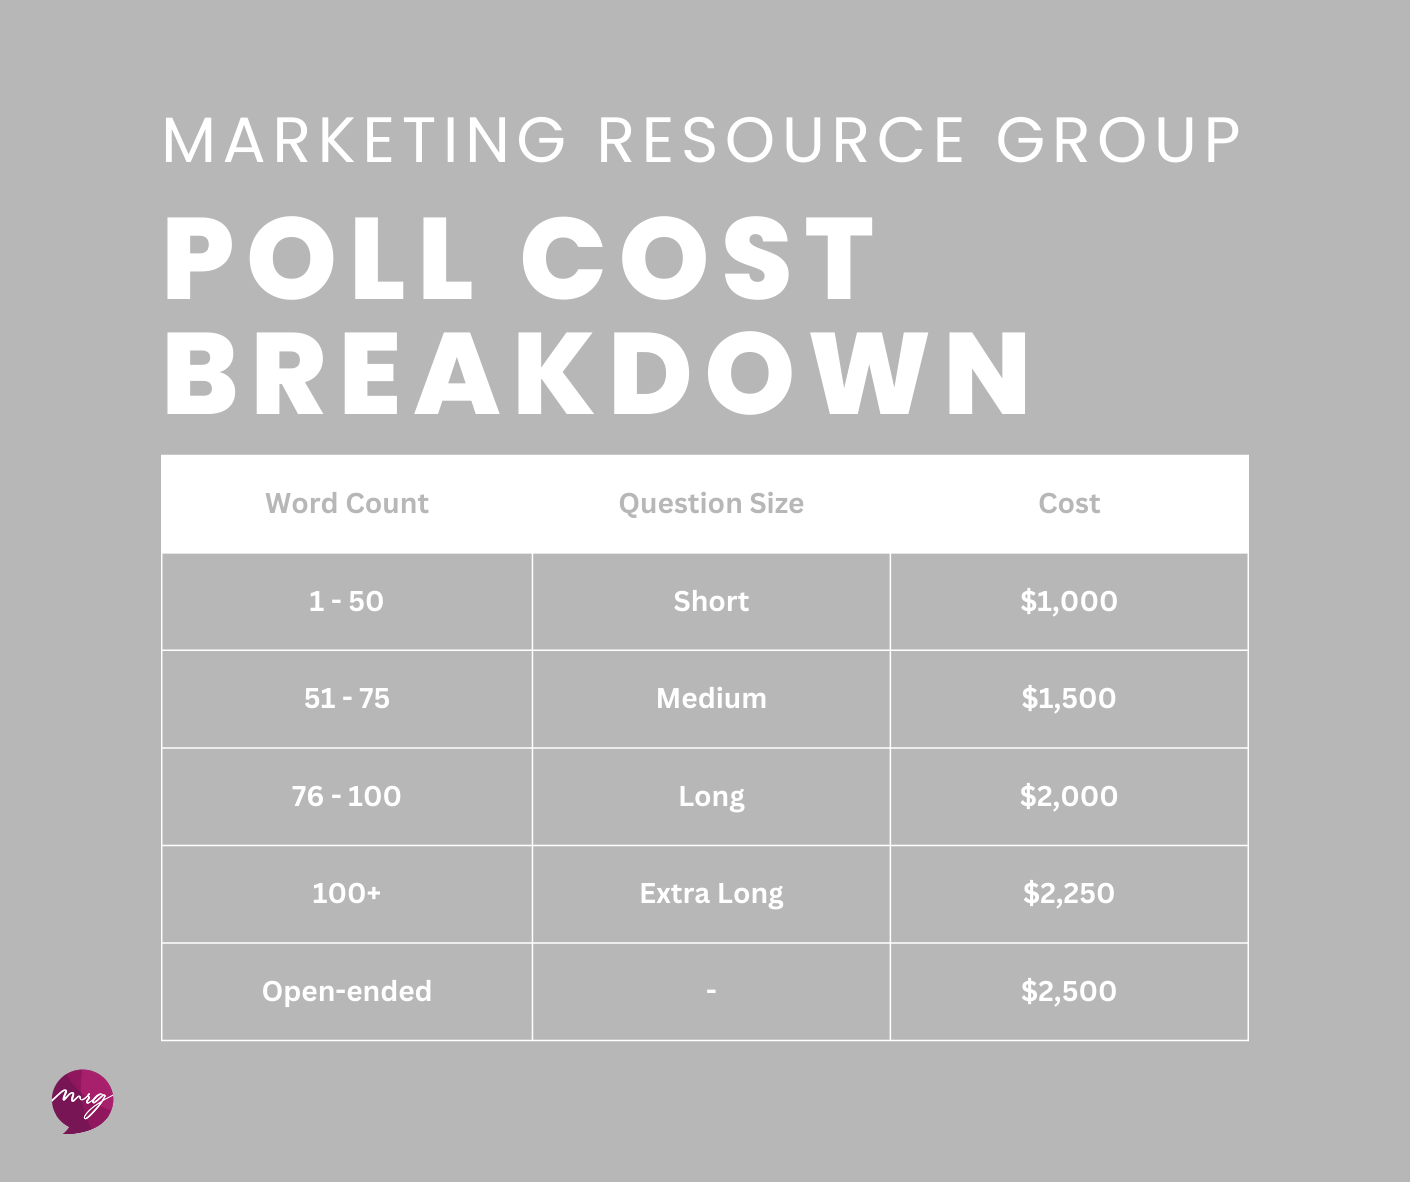 Marketing Resource Group survey research polling polls Michigan voters public opinion